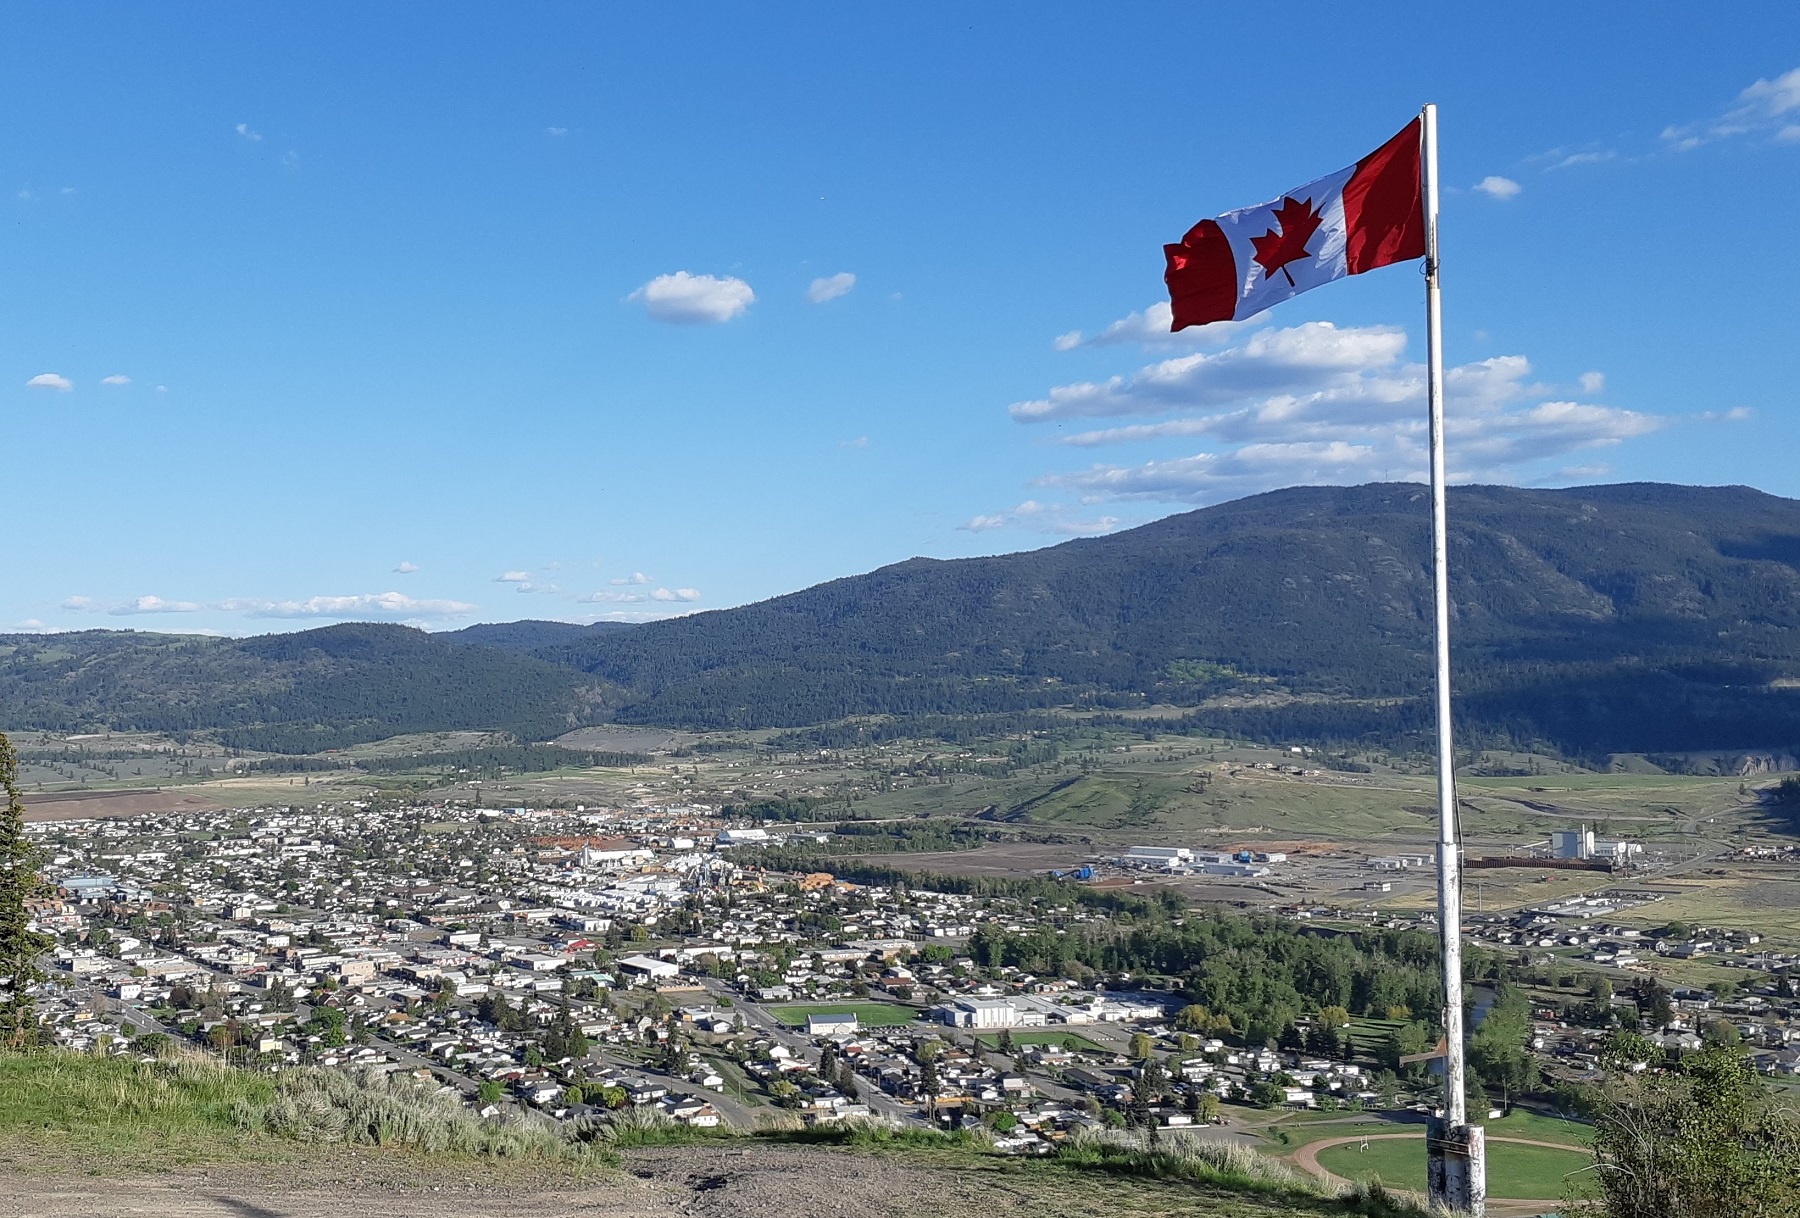 A Canadian flag flies above a flat town in the middle of a valley. There’s a clear blue sky.